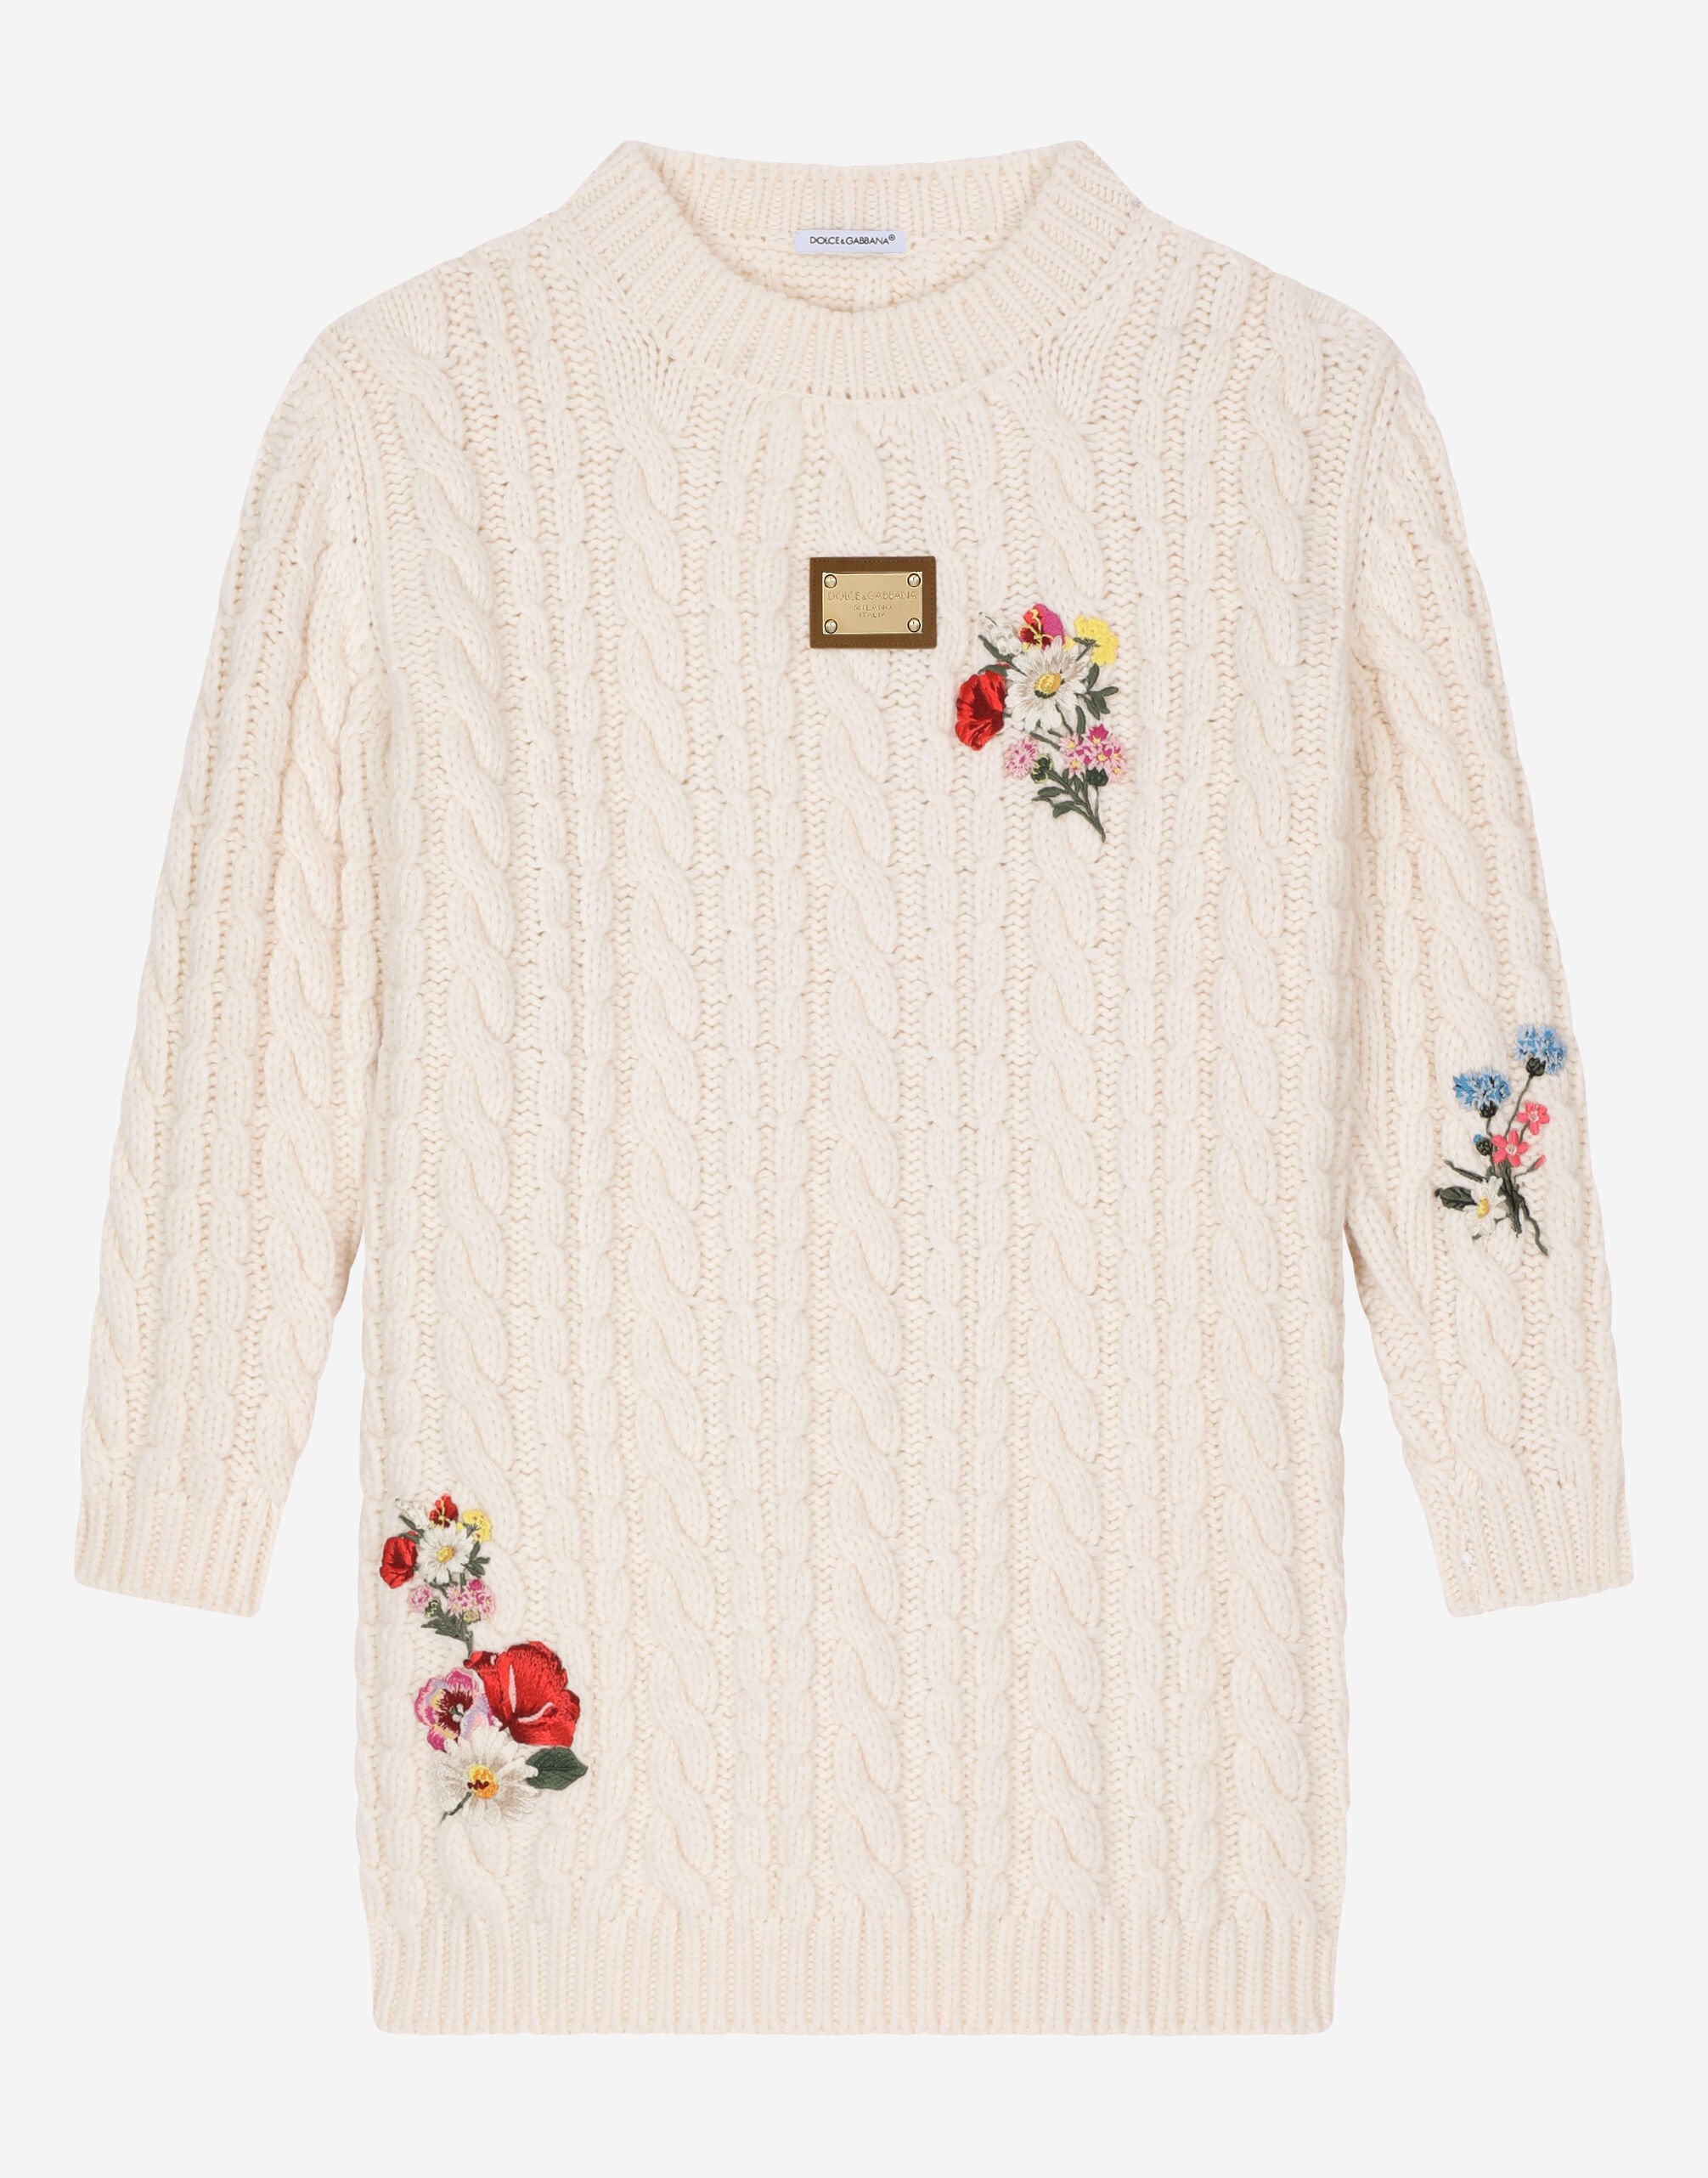 Knit dress with floral embroidery in White for | Dolce&Gabbana® US